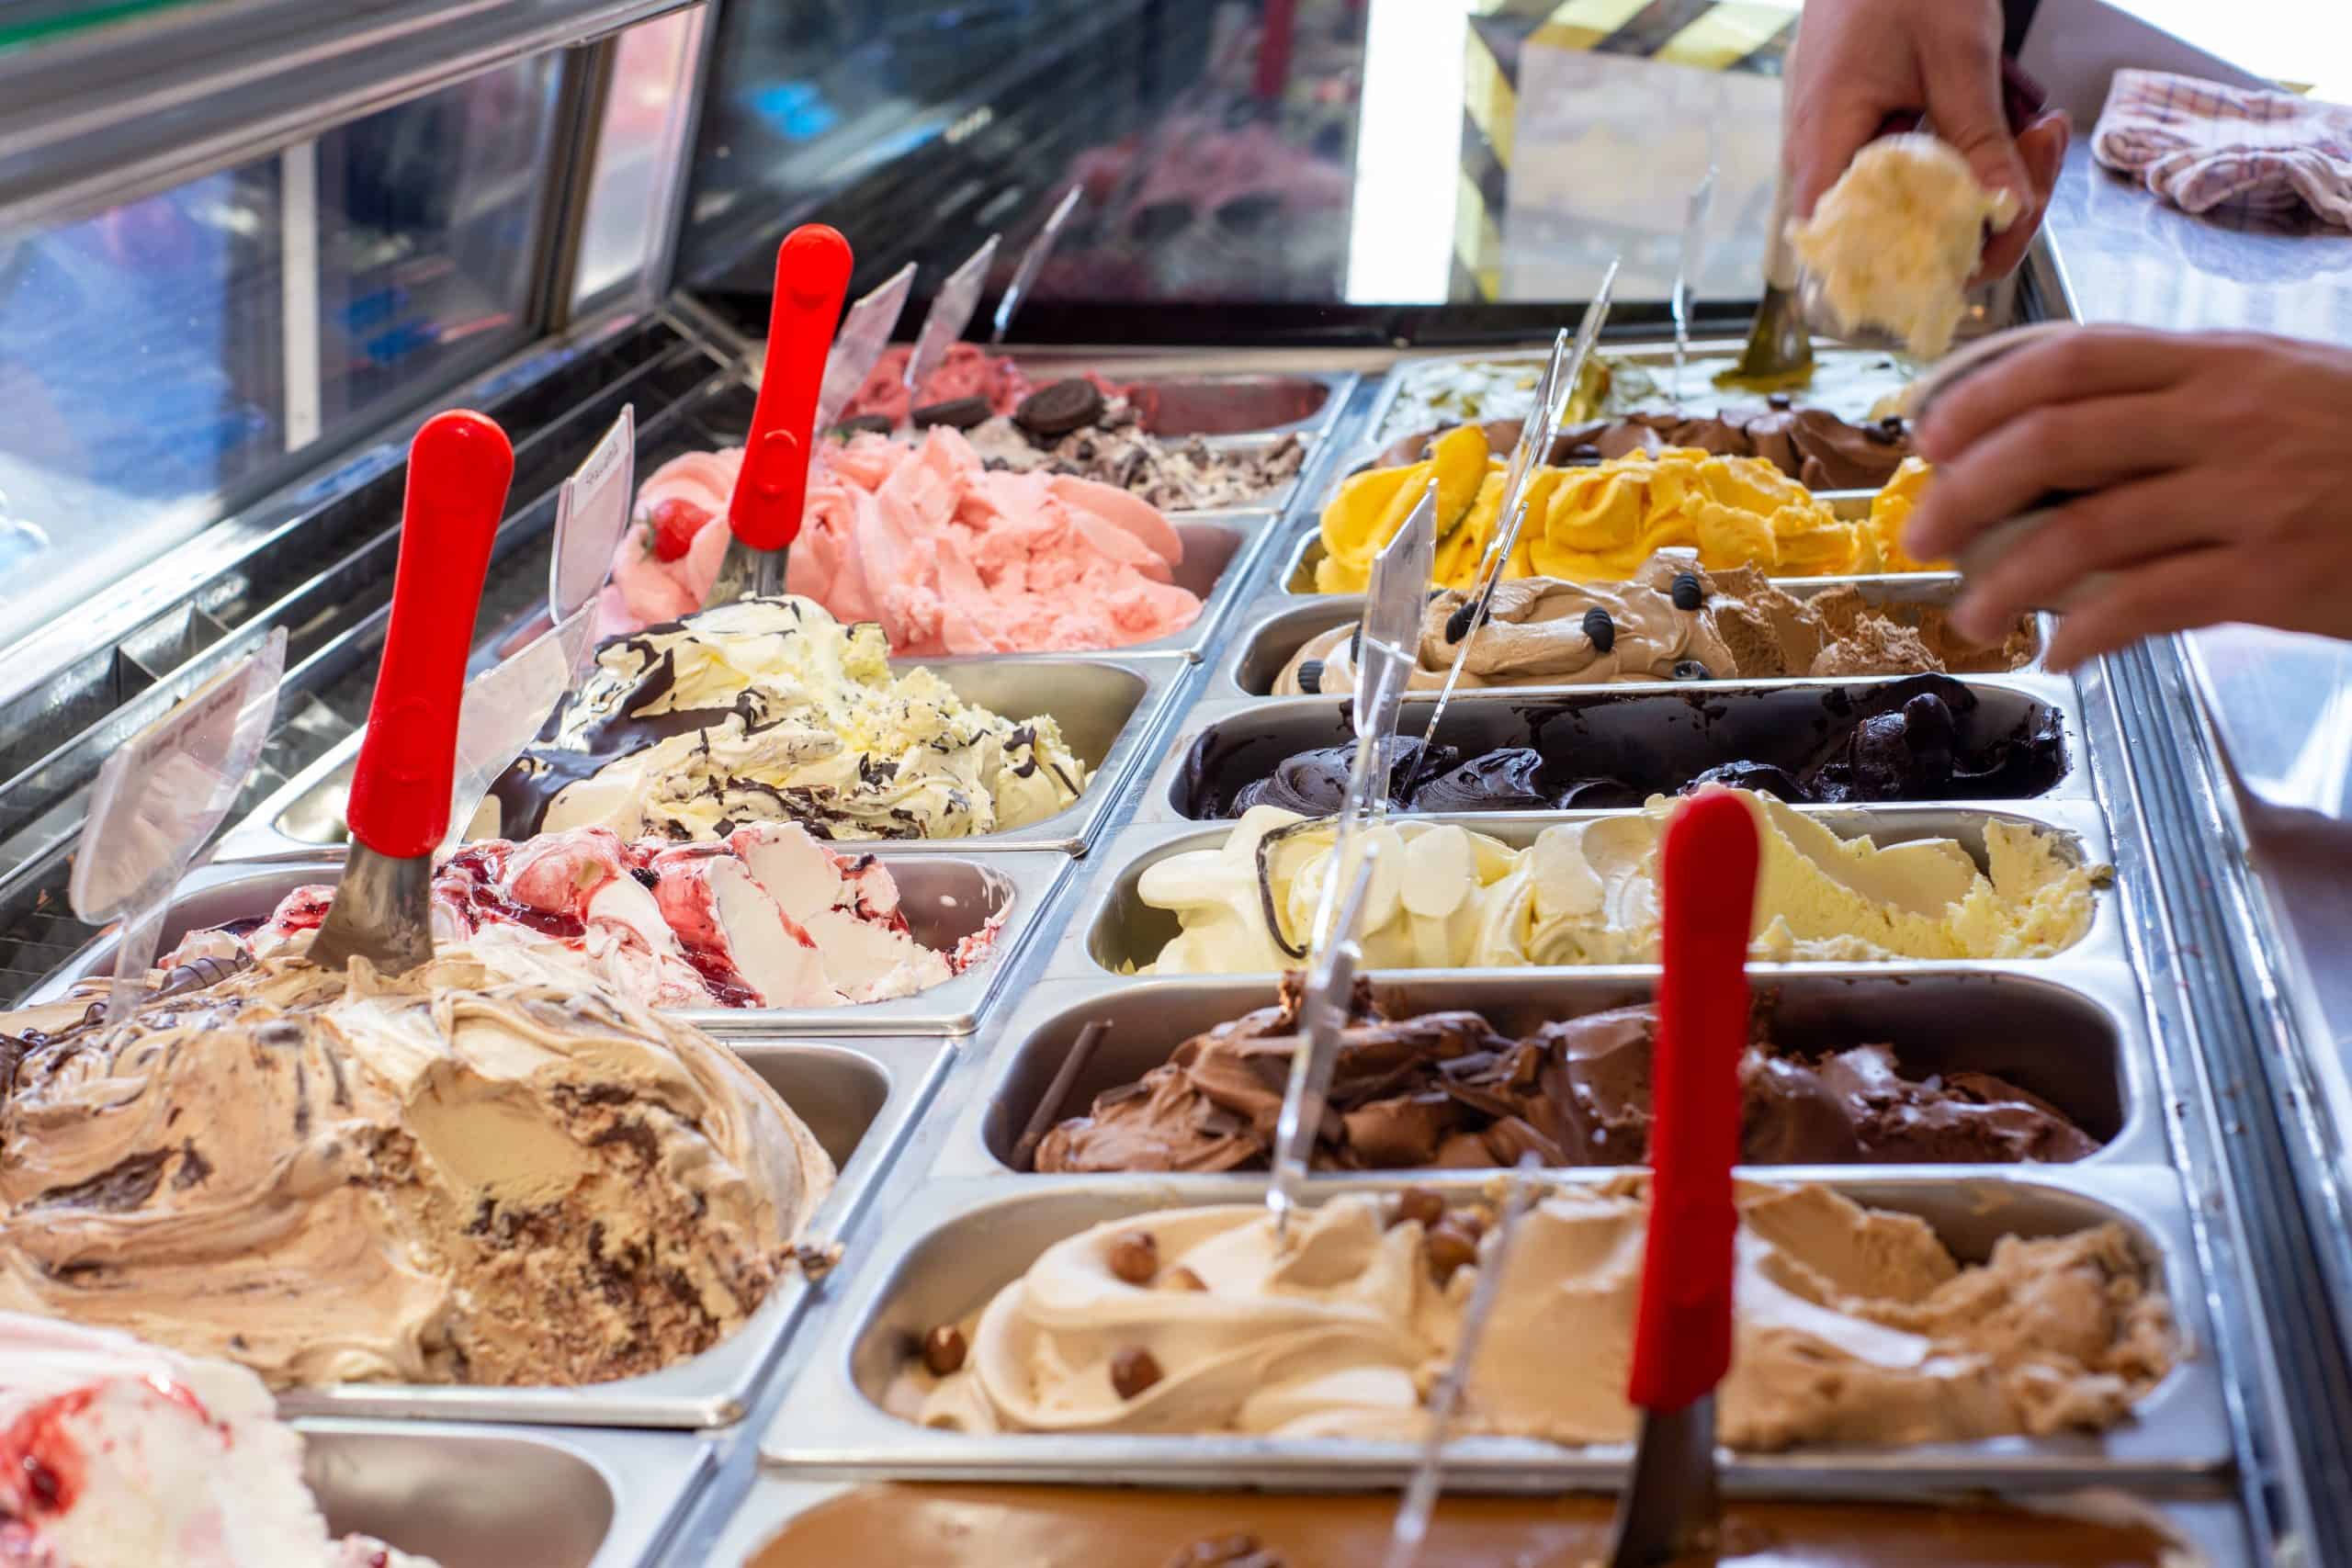 Try These Awesome Ice Cream Shops In Northeast Ohio - Lost In Laurel Land